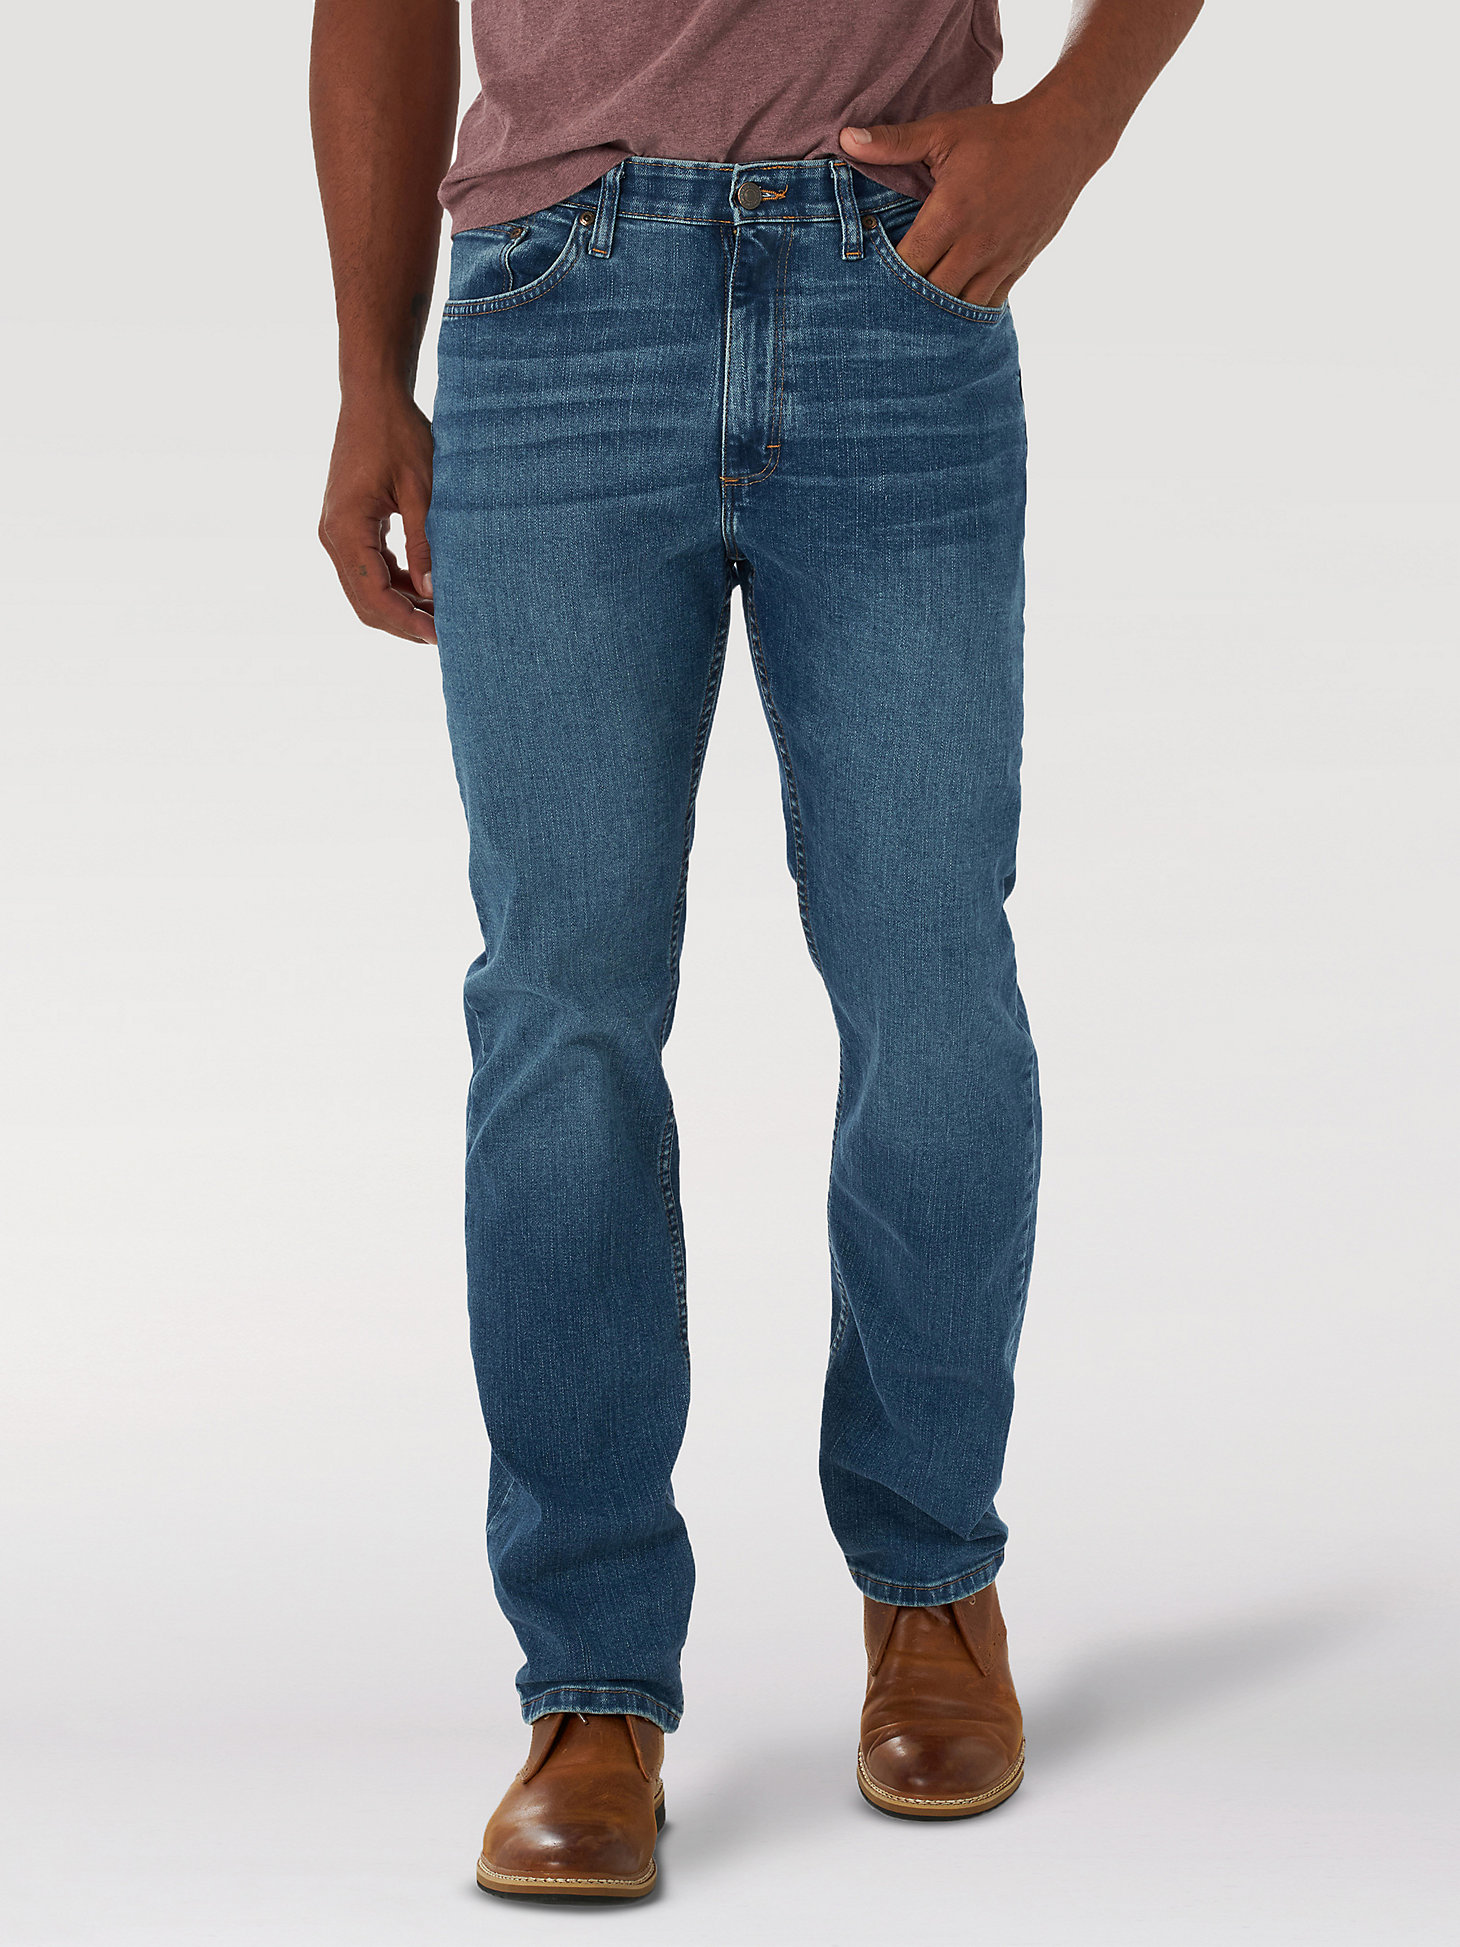 Wrangler Mens Authentic Regular Jeans Thousands of Products Promotional ...